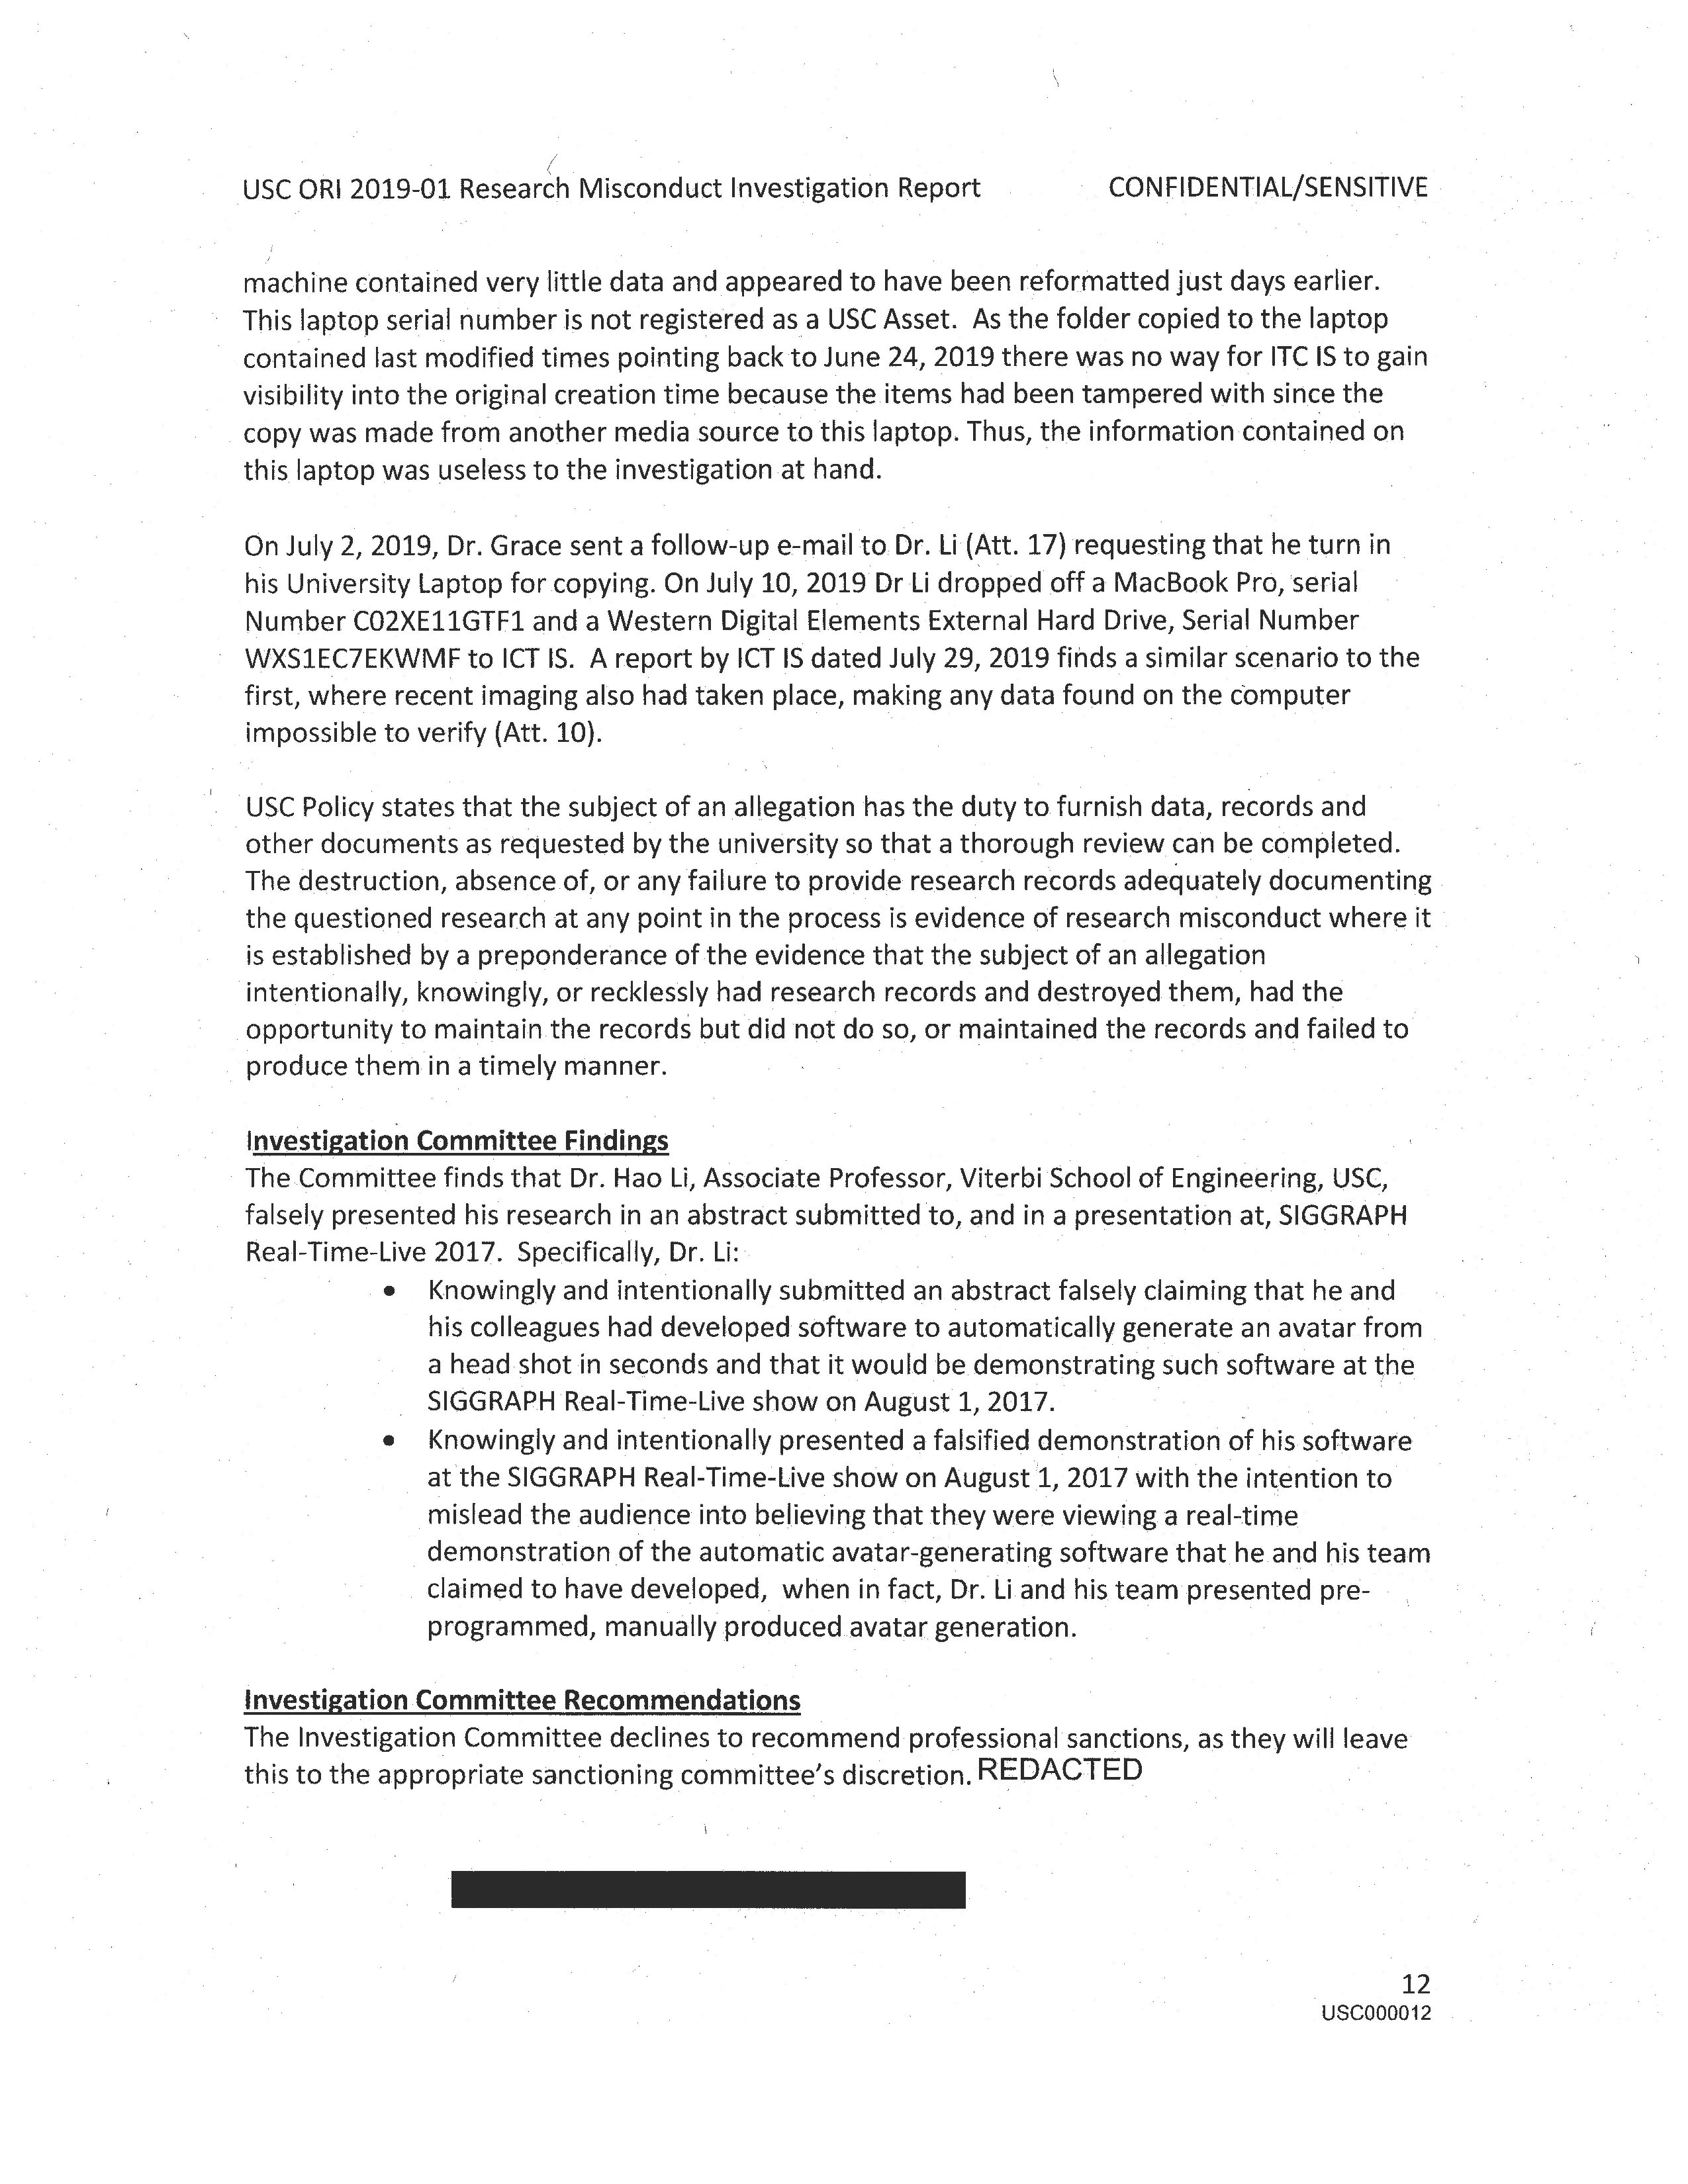 USC's Investigation Report re Hao Li's and Pinscreen's Scientific Misconduct at ACM SIGGRAPH RTL 2017 [Summary] Page 14